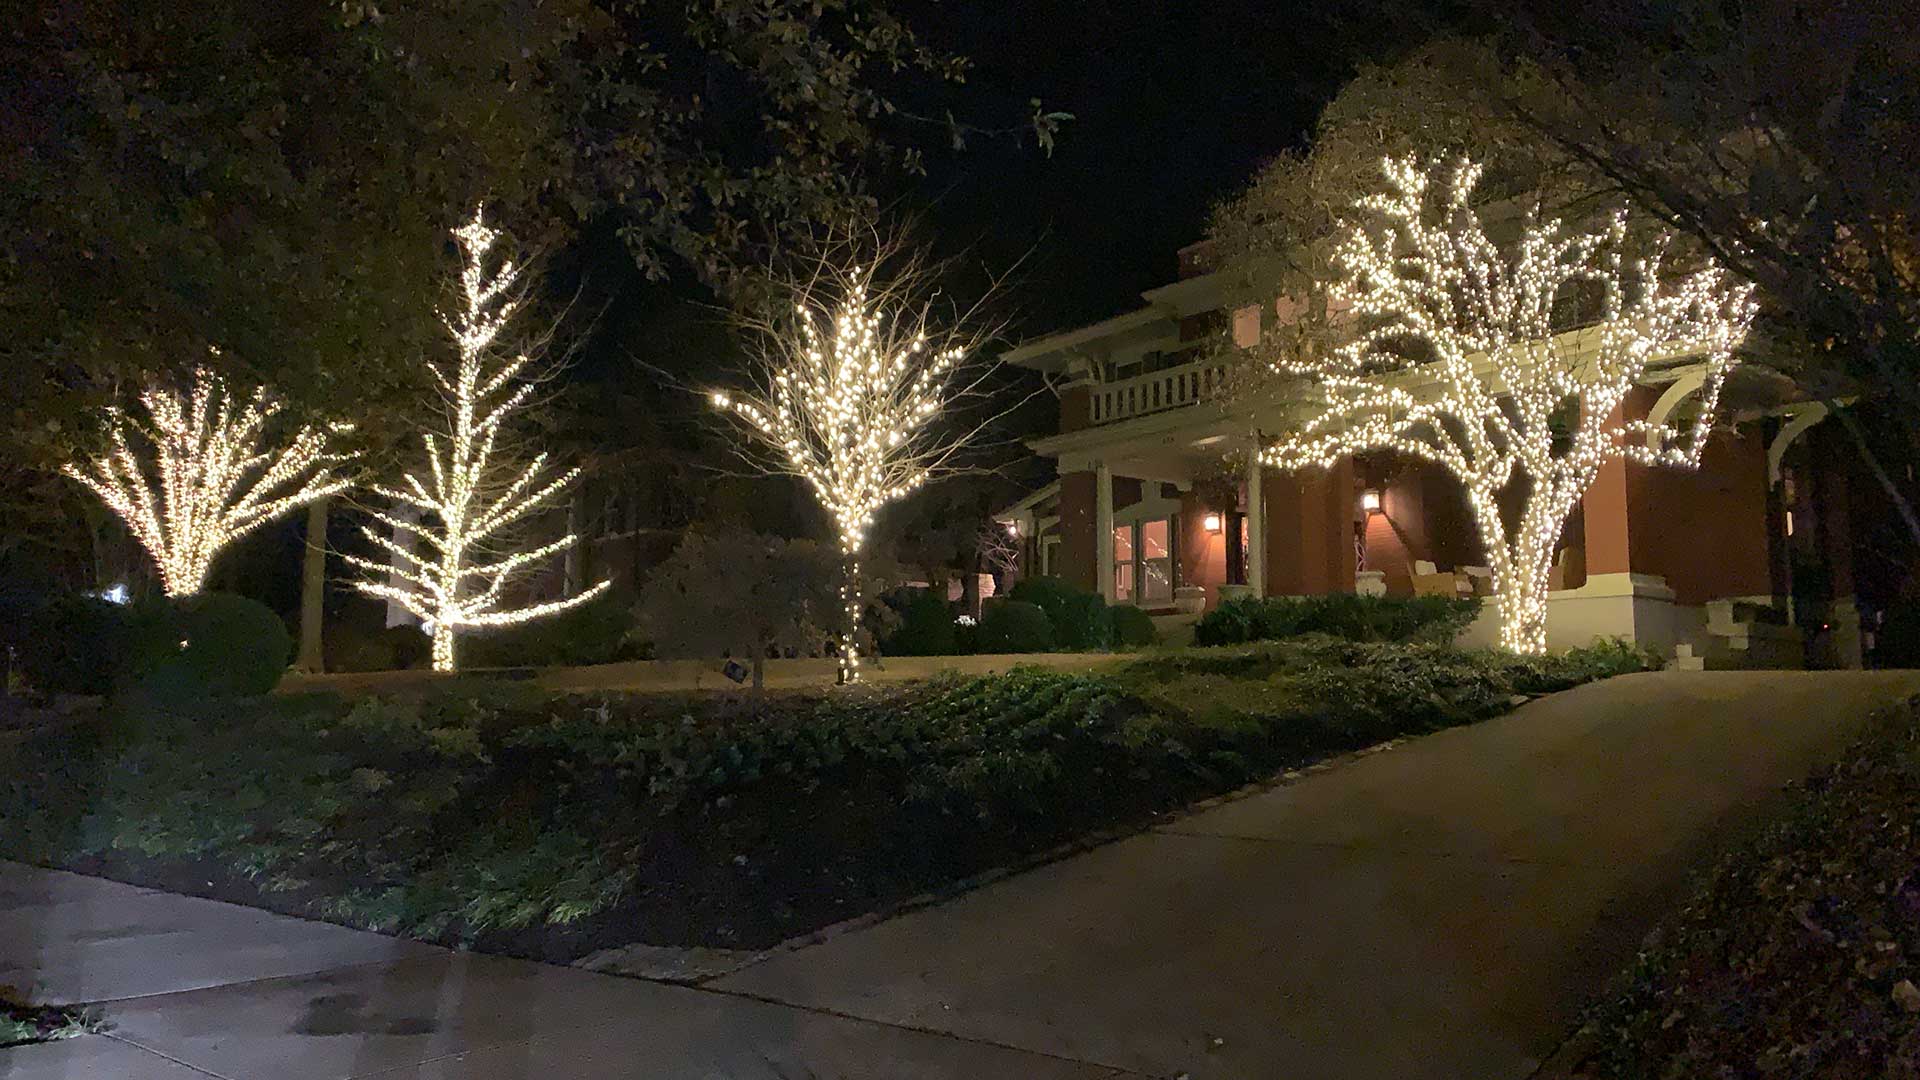 Home in Bartlett, TN with holiday lighting decorations.